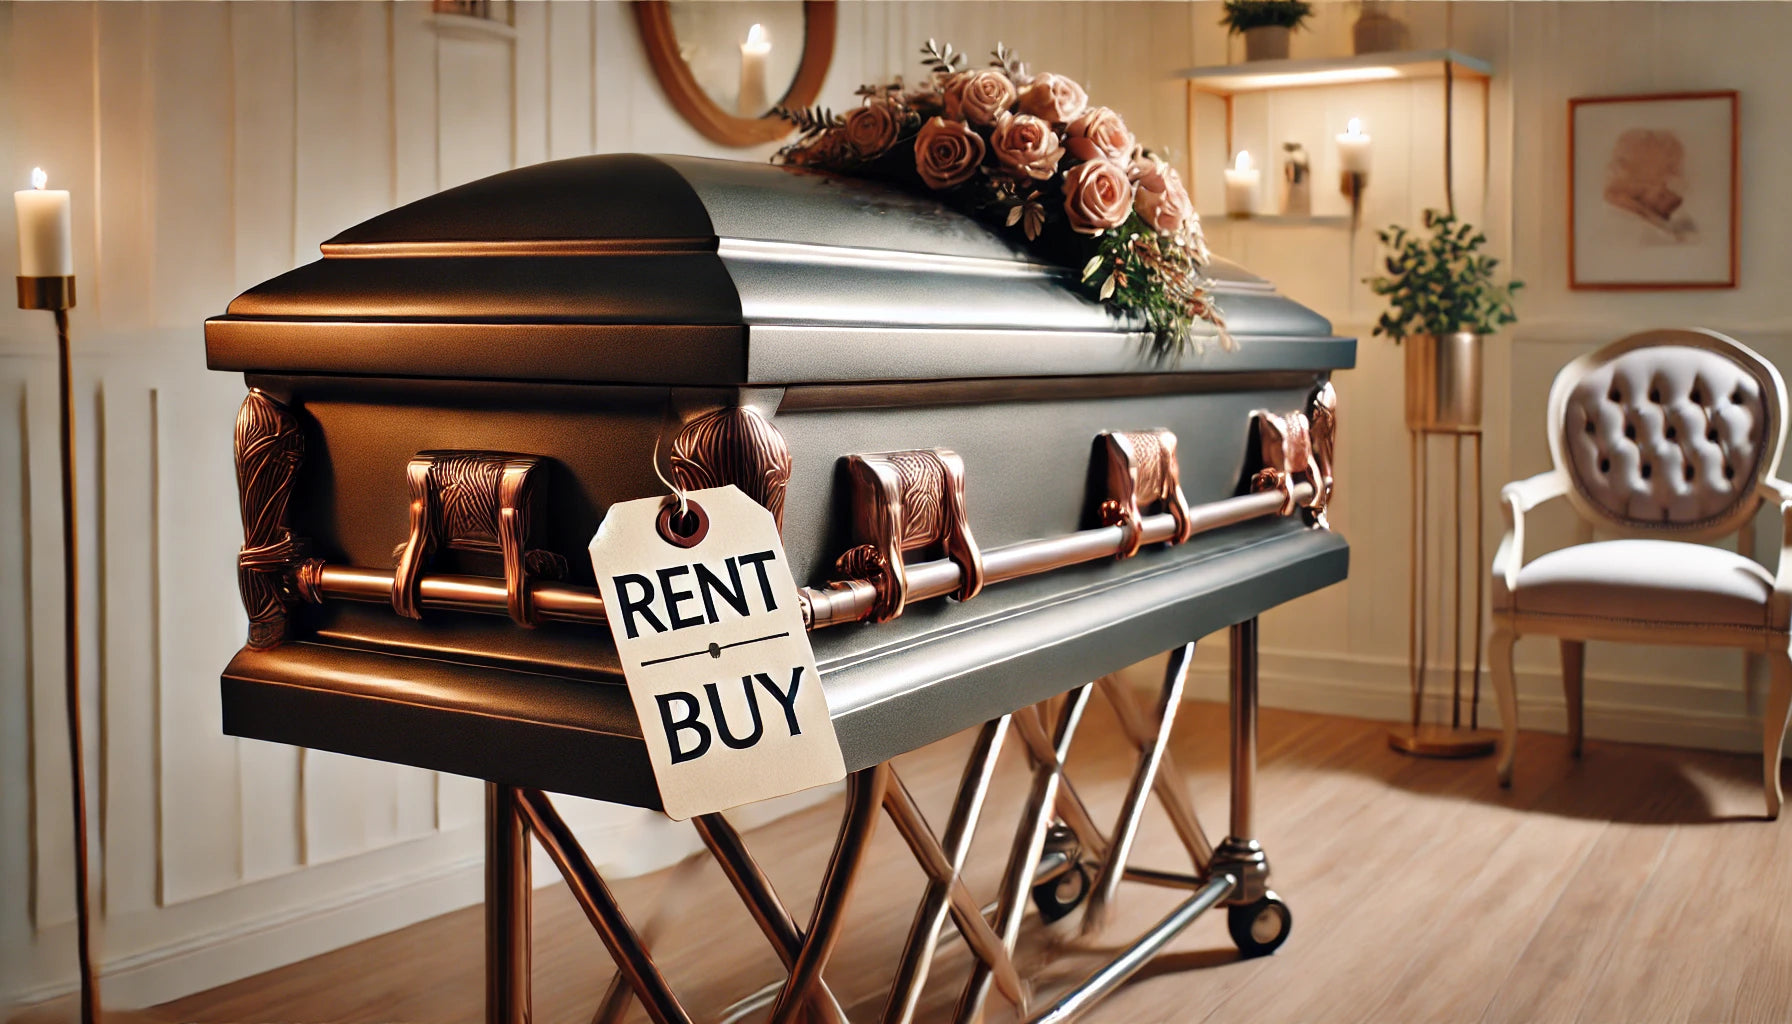 Renting vs Buying a Funeral Casket